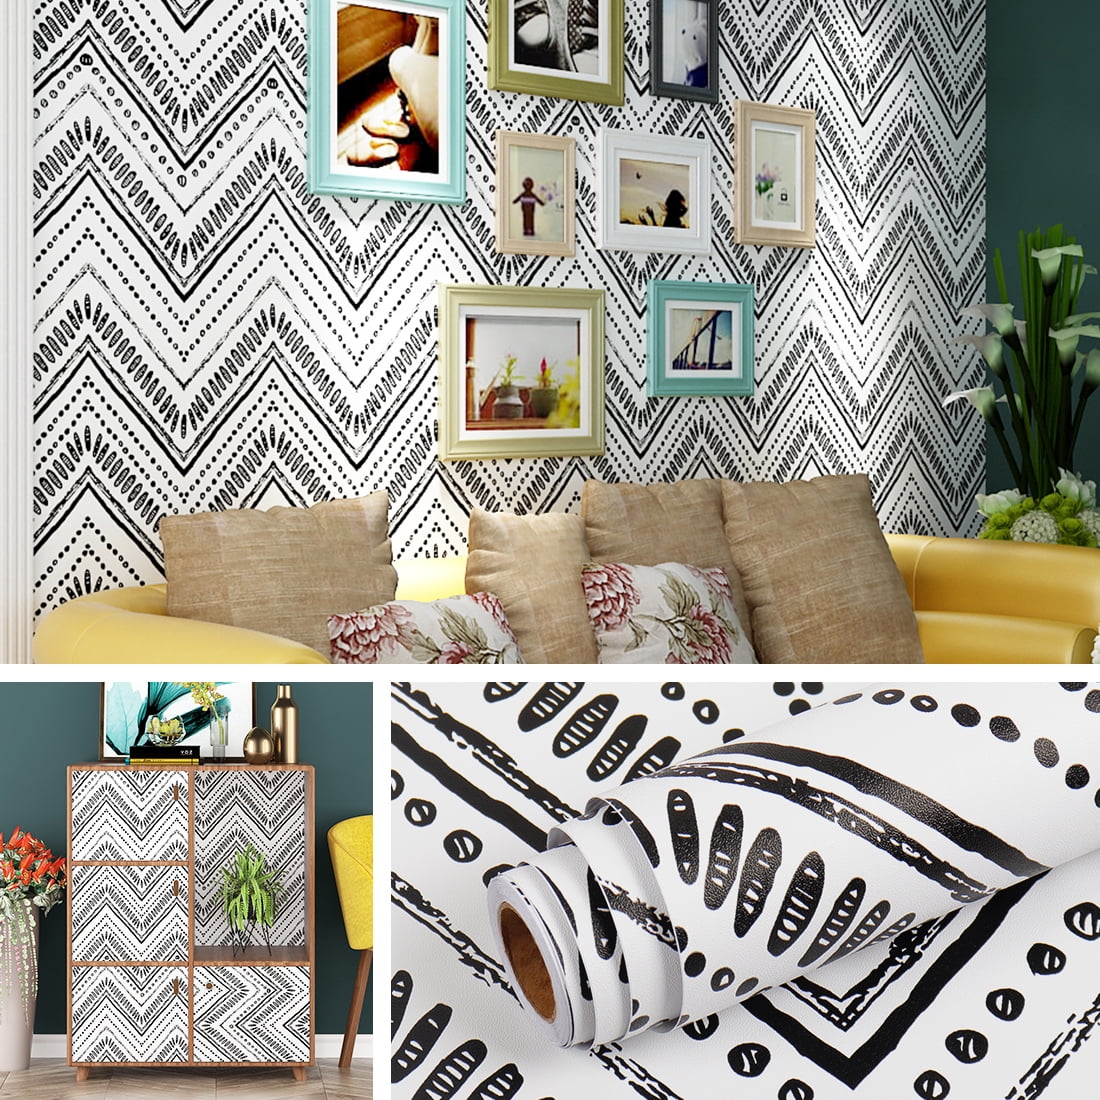 Buy Geometric Lines Chevron Pattern NonPVC SelfAdhesive Peel  Stick  Vinyl Wallpaper Roll Cover 36 sqft Area Online in India at Best Price   Modern WallPaper  Wall Arts  Home Decor 